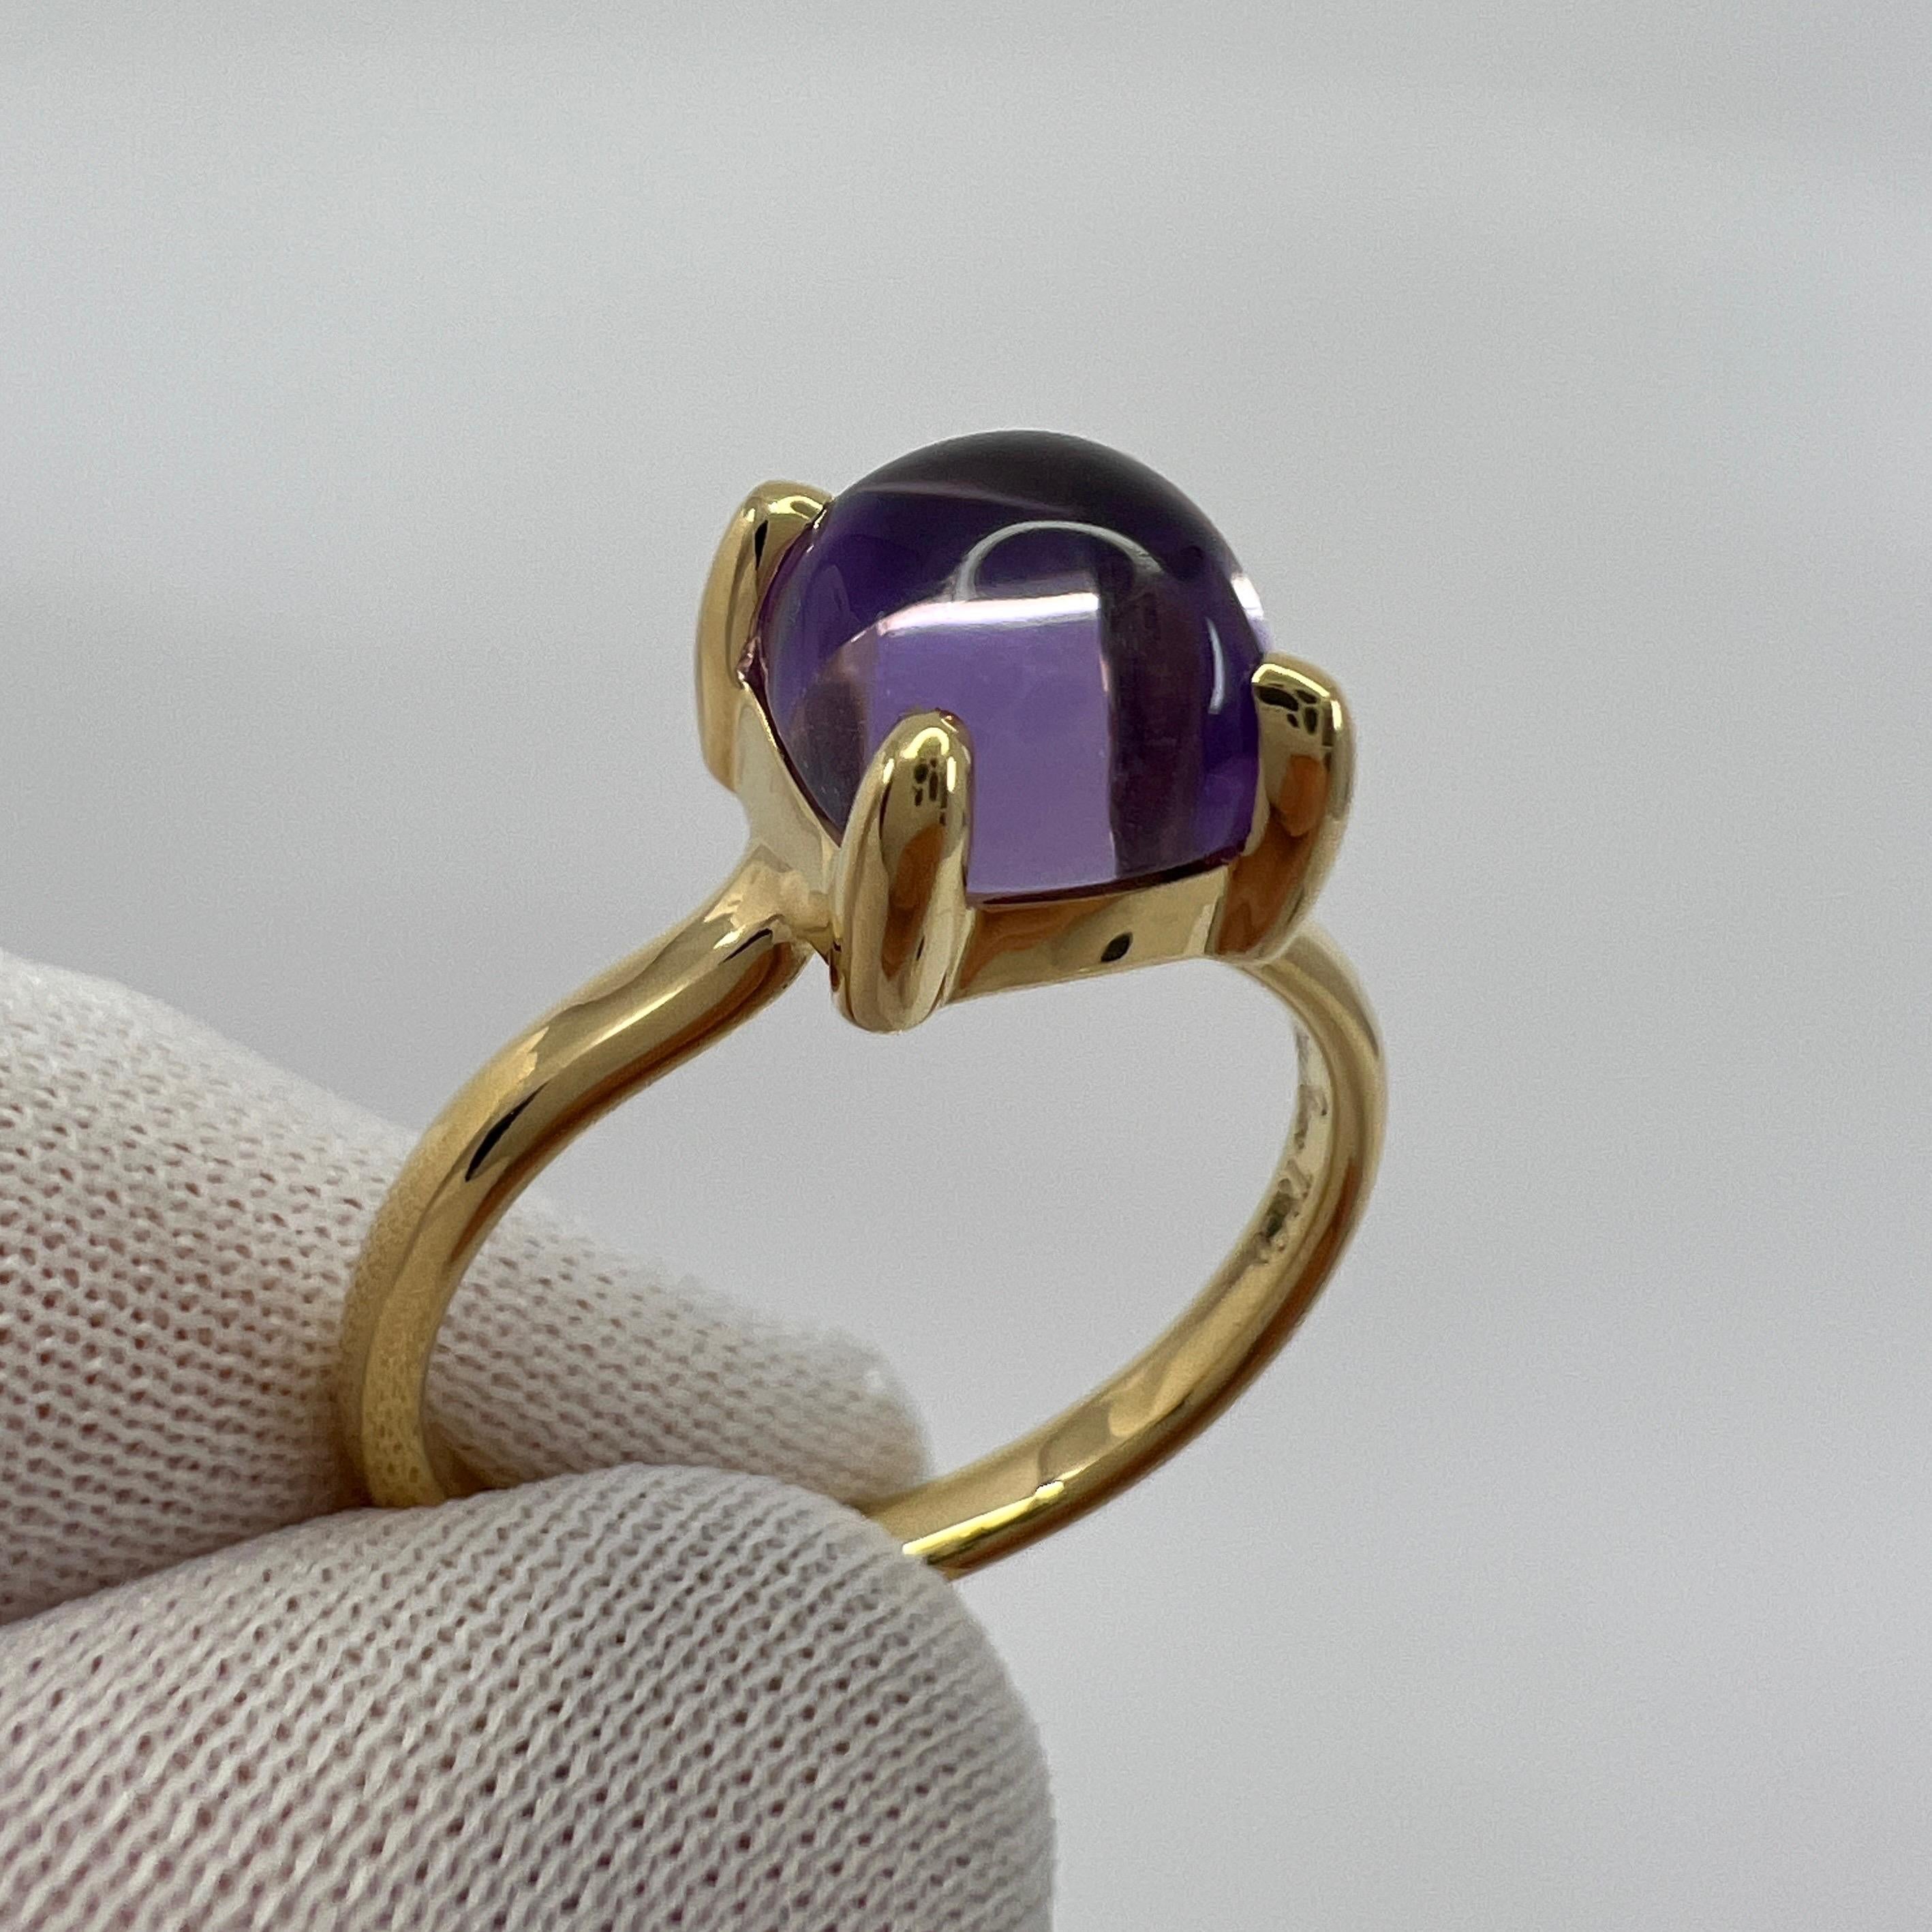 Rare Tiffany & Co. Paloma Picasso Amethyst Sugar Stack Loaf 18k Yellow Gold Ring For Sale 3